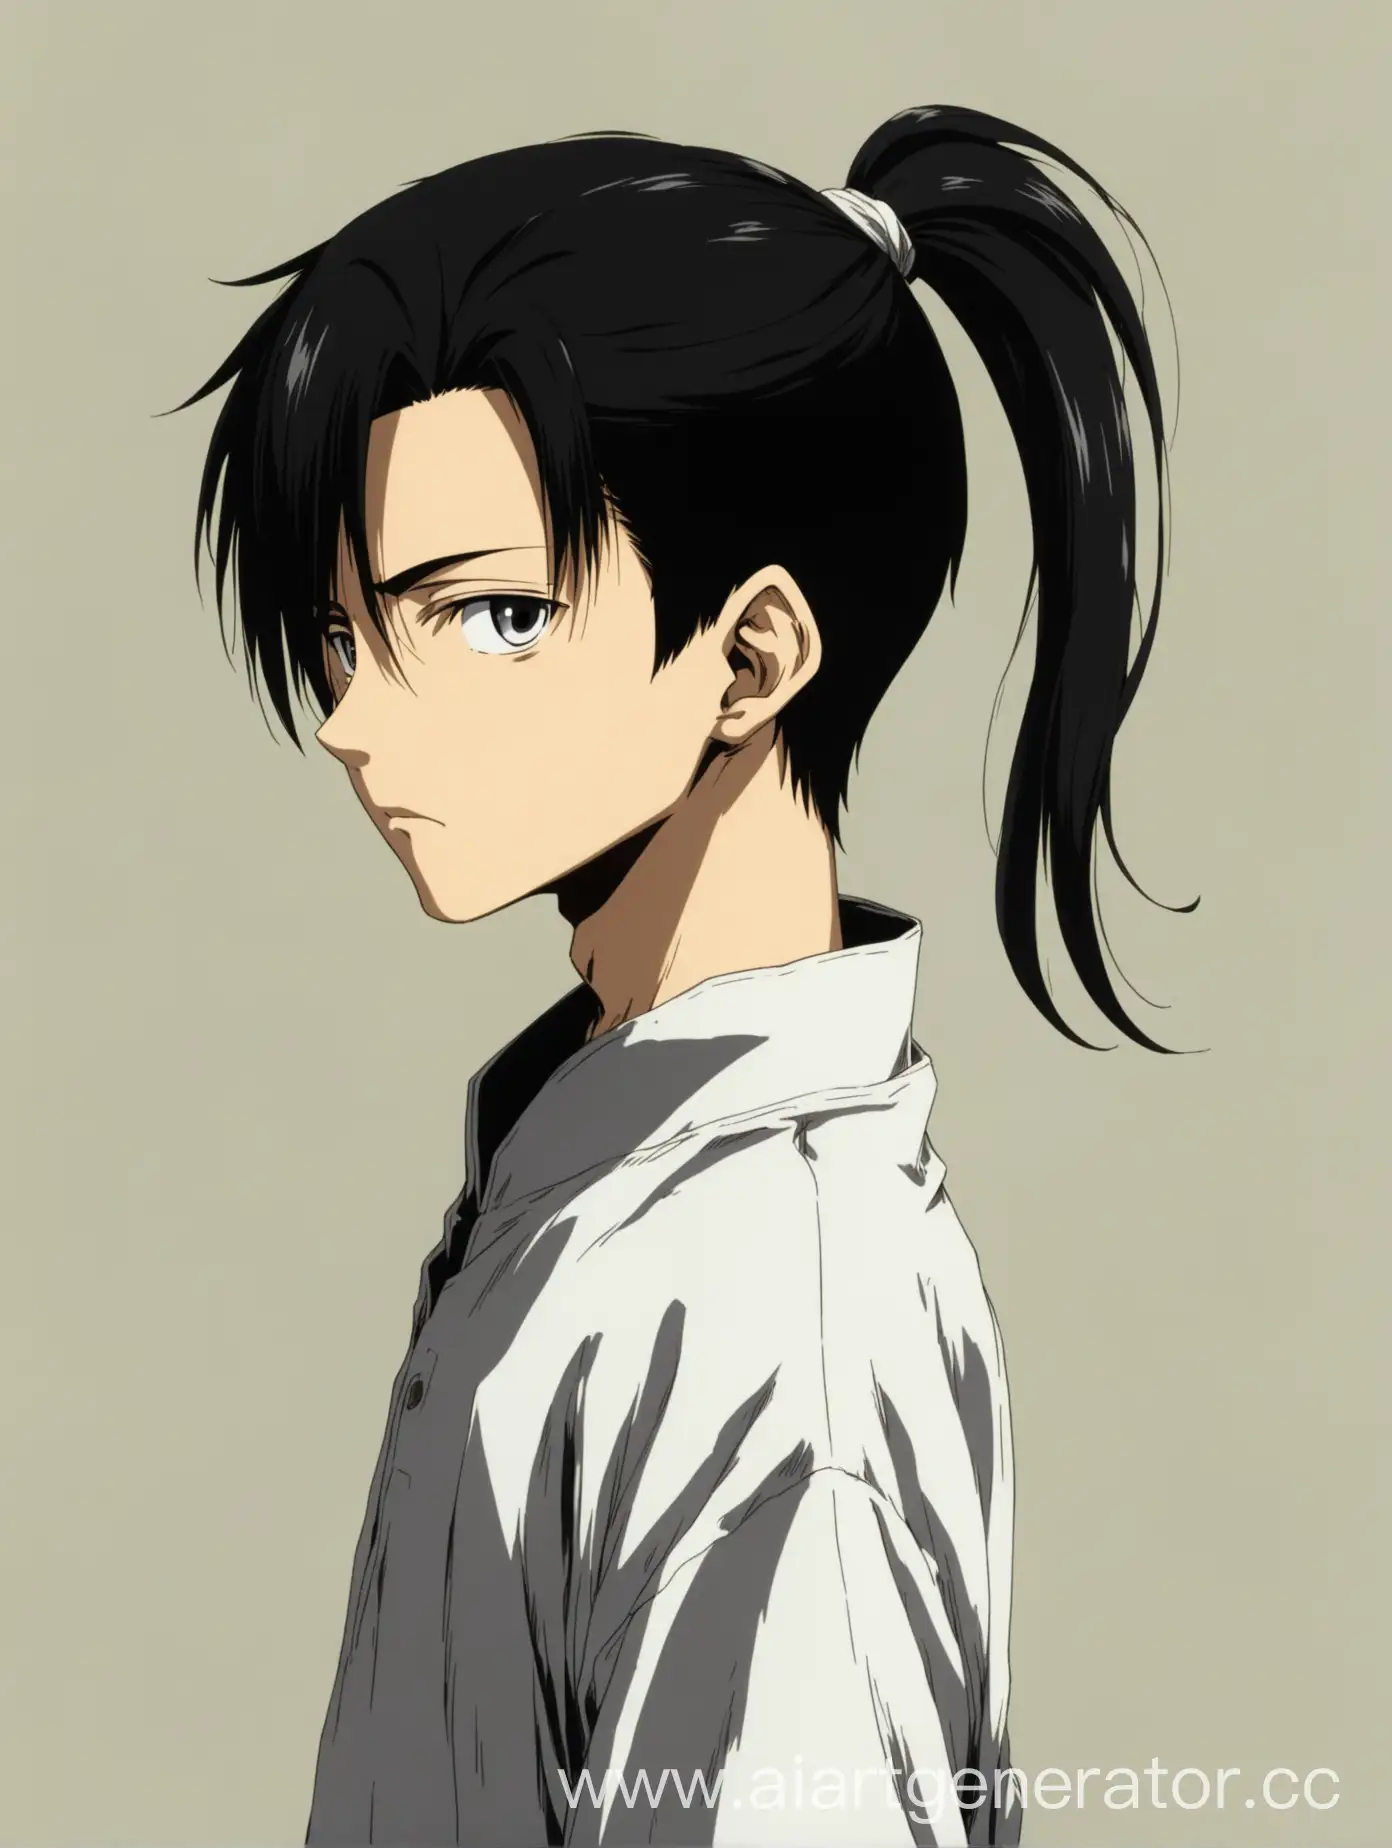 Stylish-Anime-Boy-with-White-Hair-in-a-Ponytail